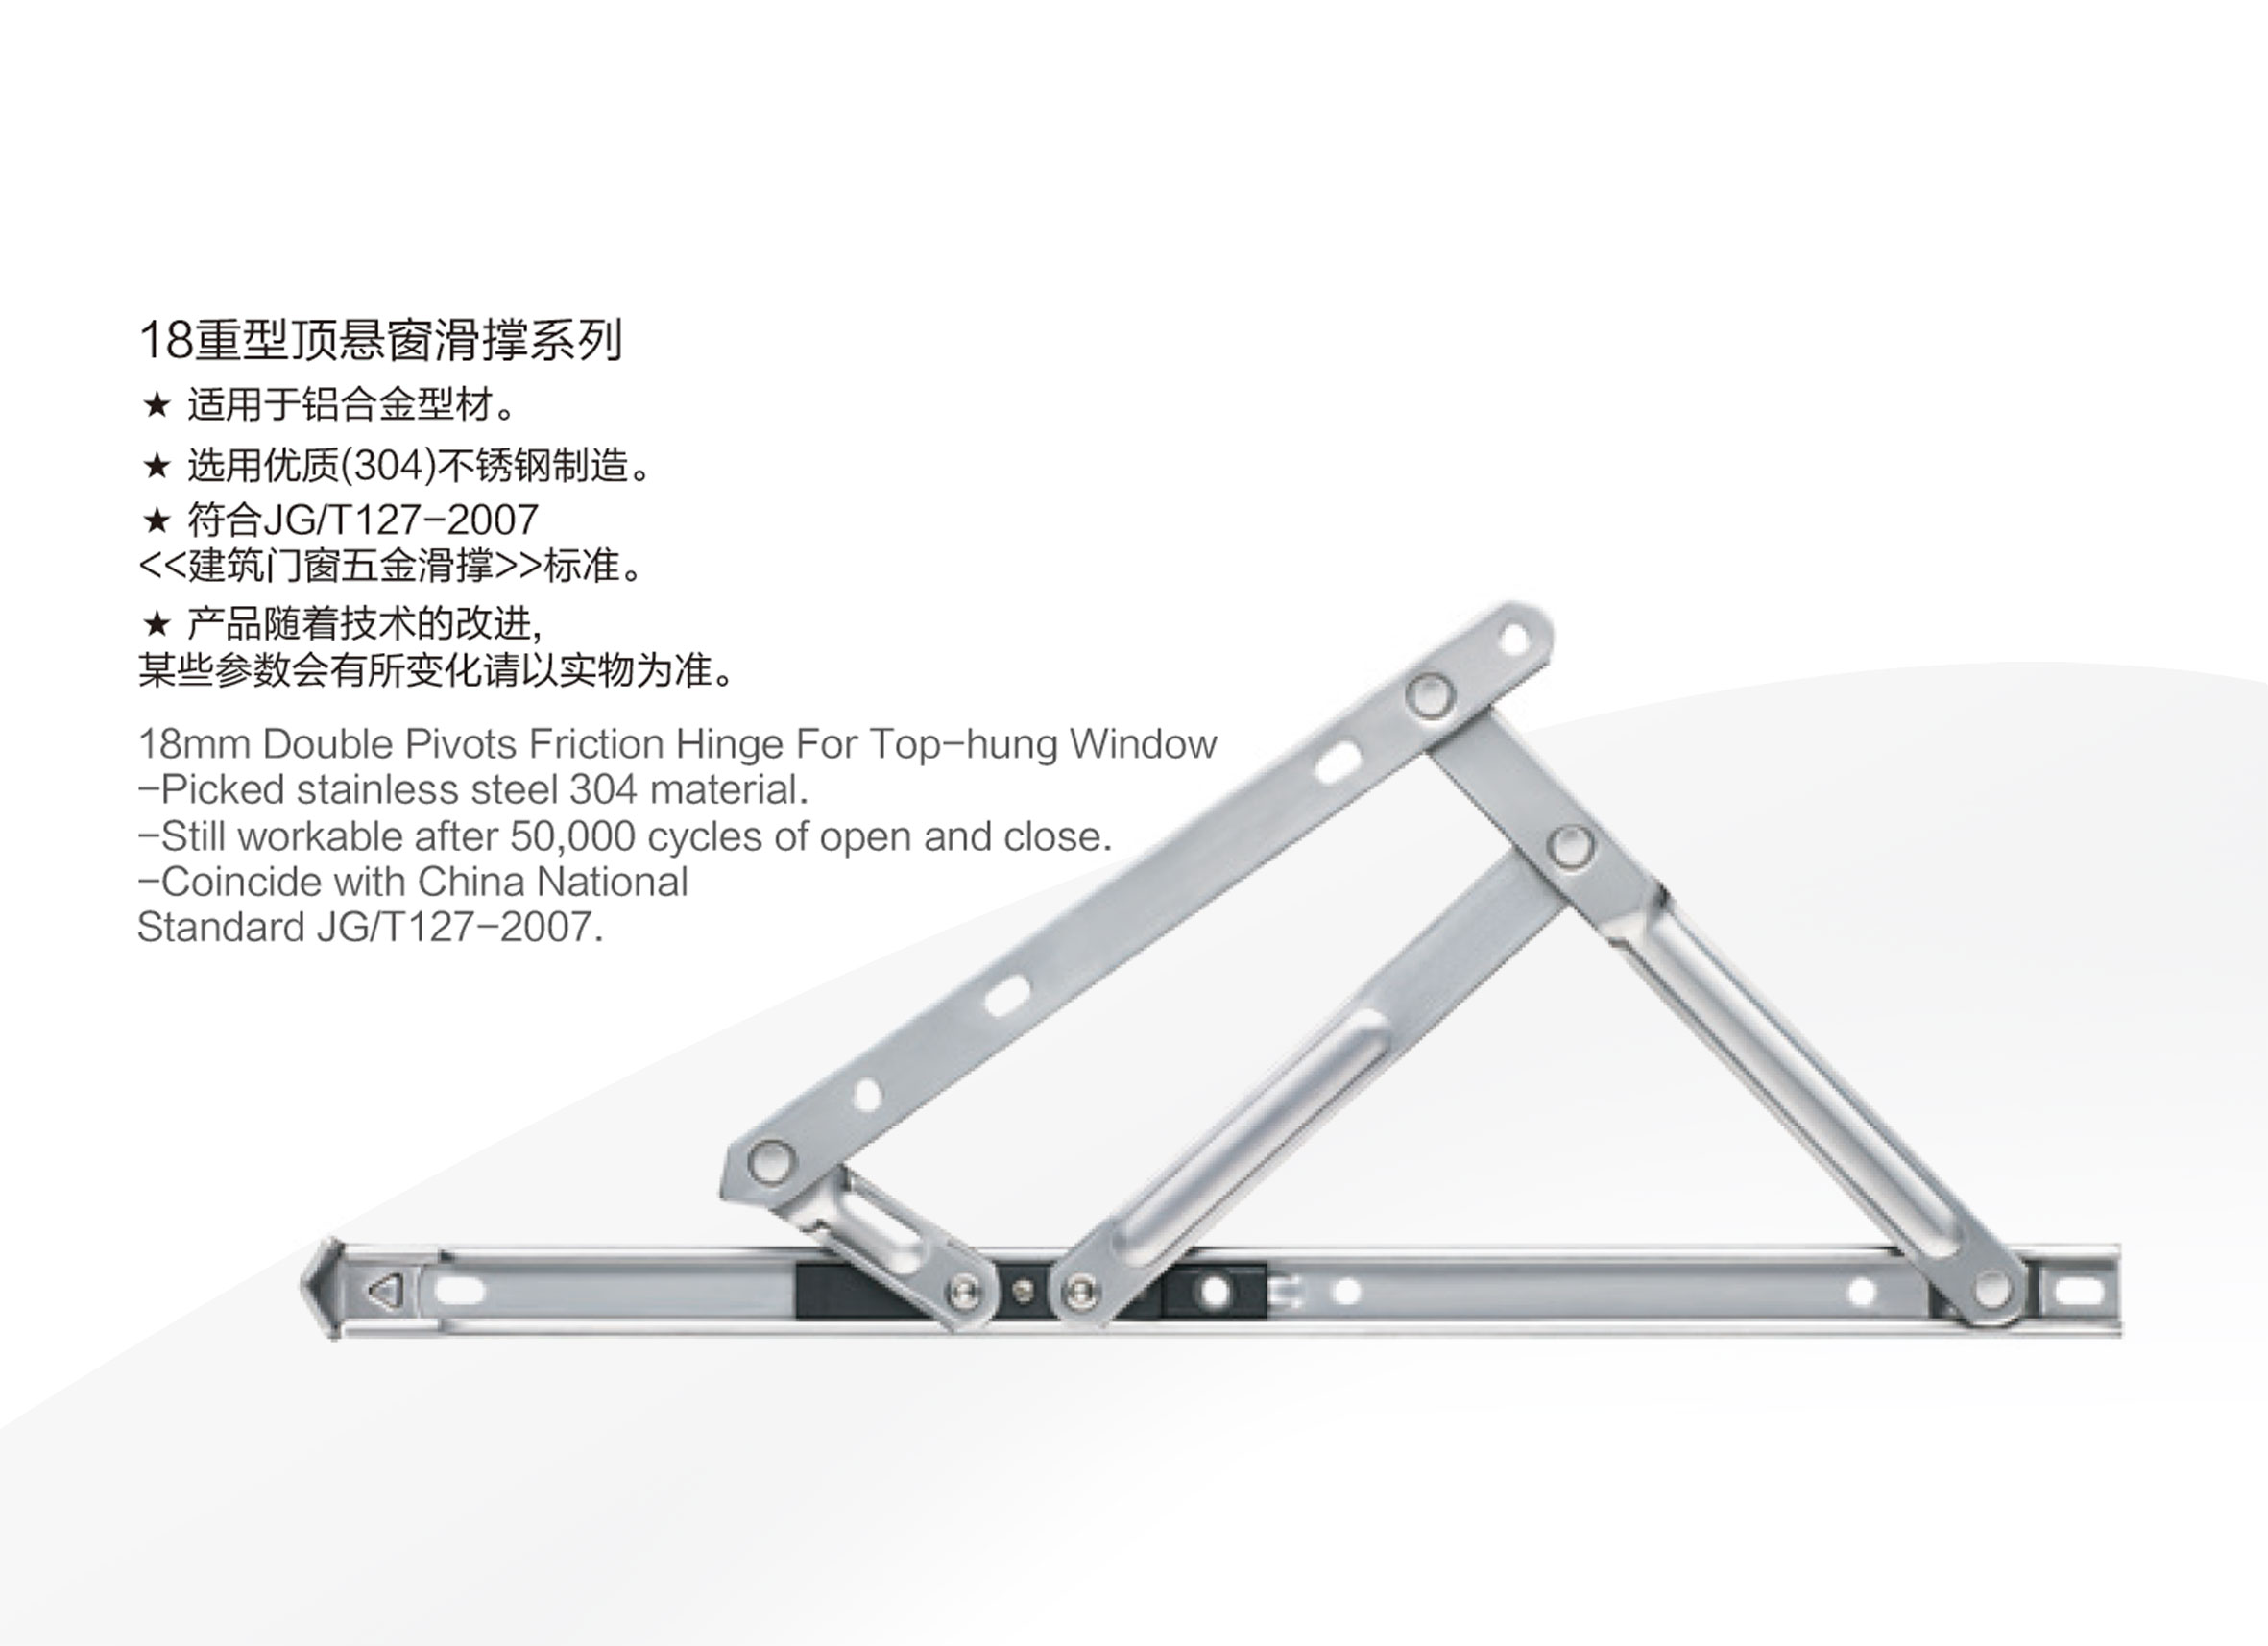 18mm Double Pivots Friction Hinge For Top-hung Window